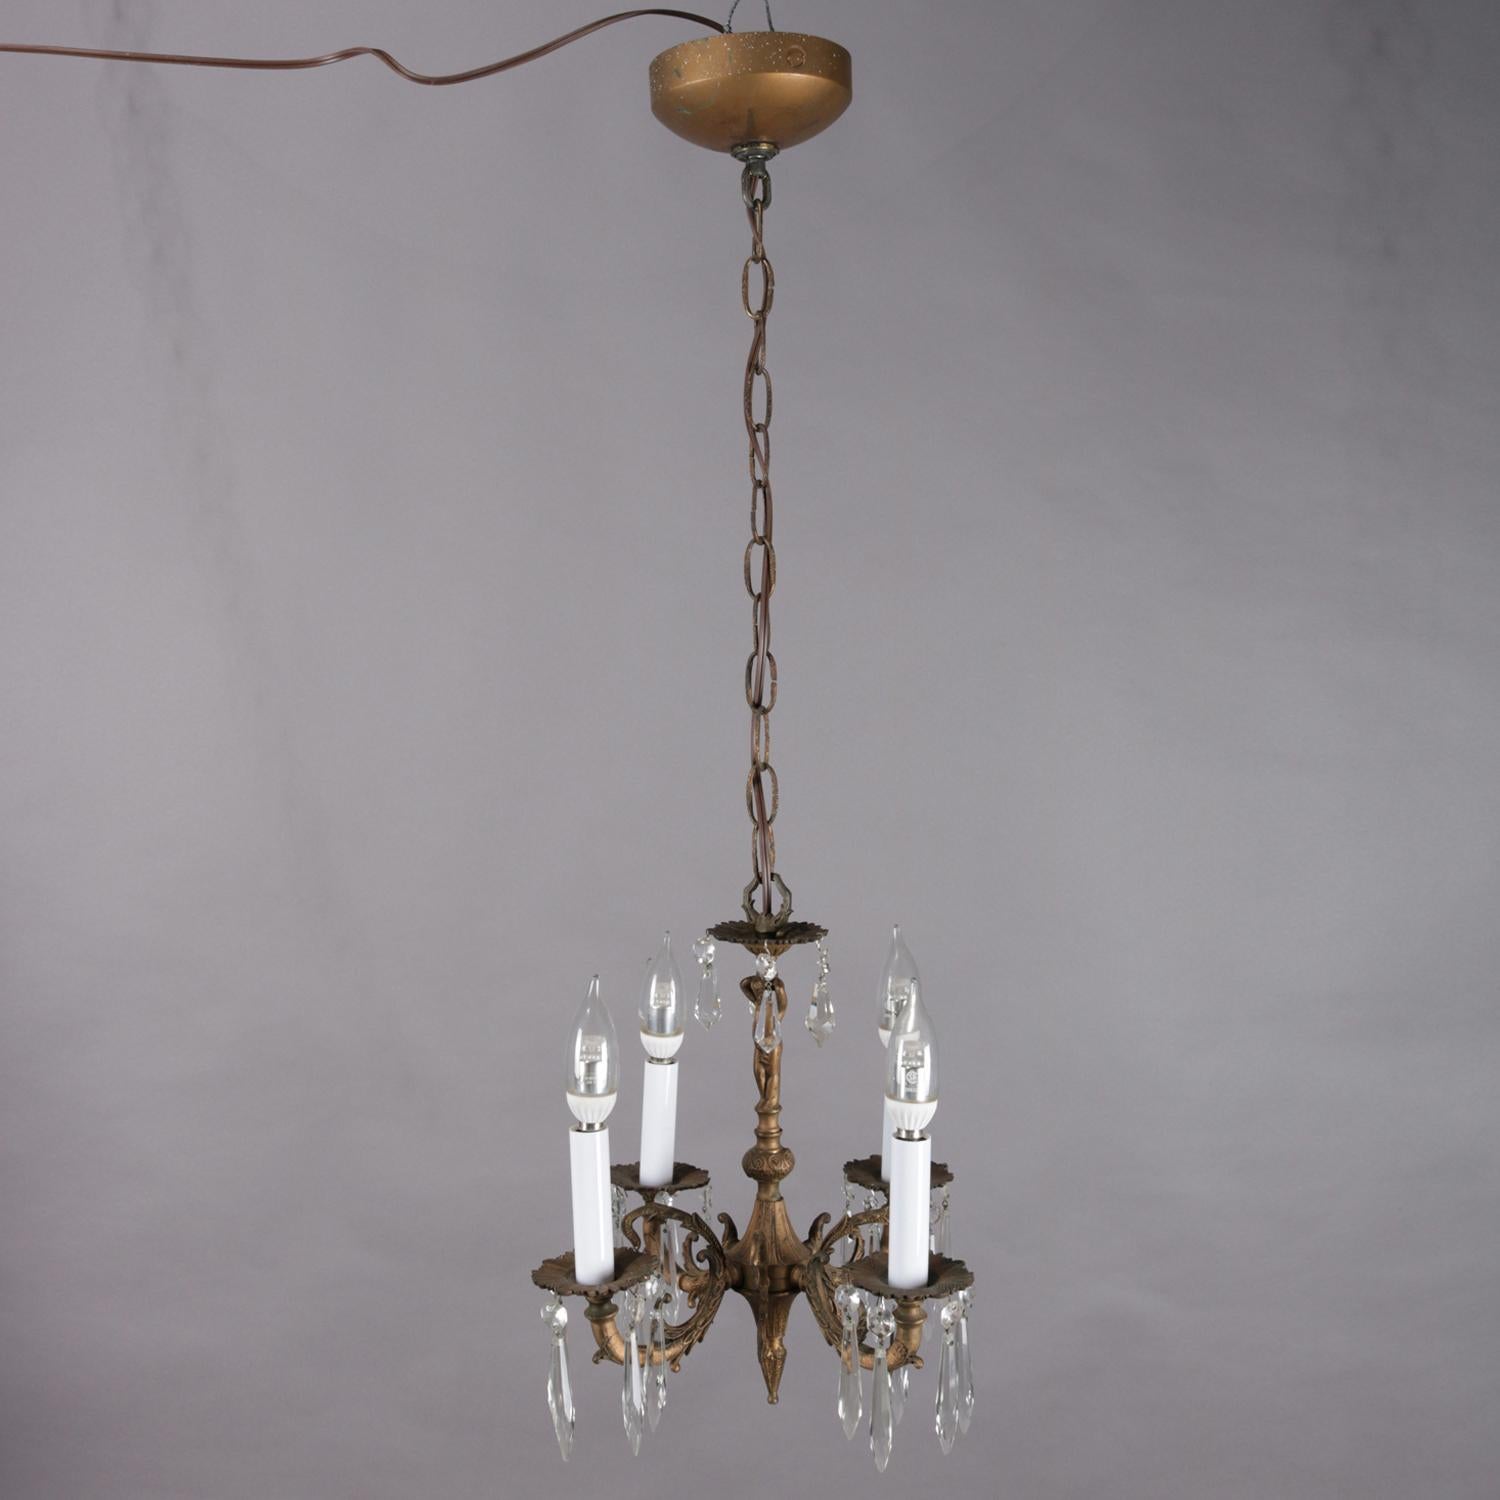 A neoclassical figural petite branch chandelier features bronzed metal frame with cherub column having four foliate decorated c-scroll arms terminating in candle lights, cut crystal hanging prisms throughout, additional prism receptors (designer